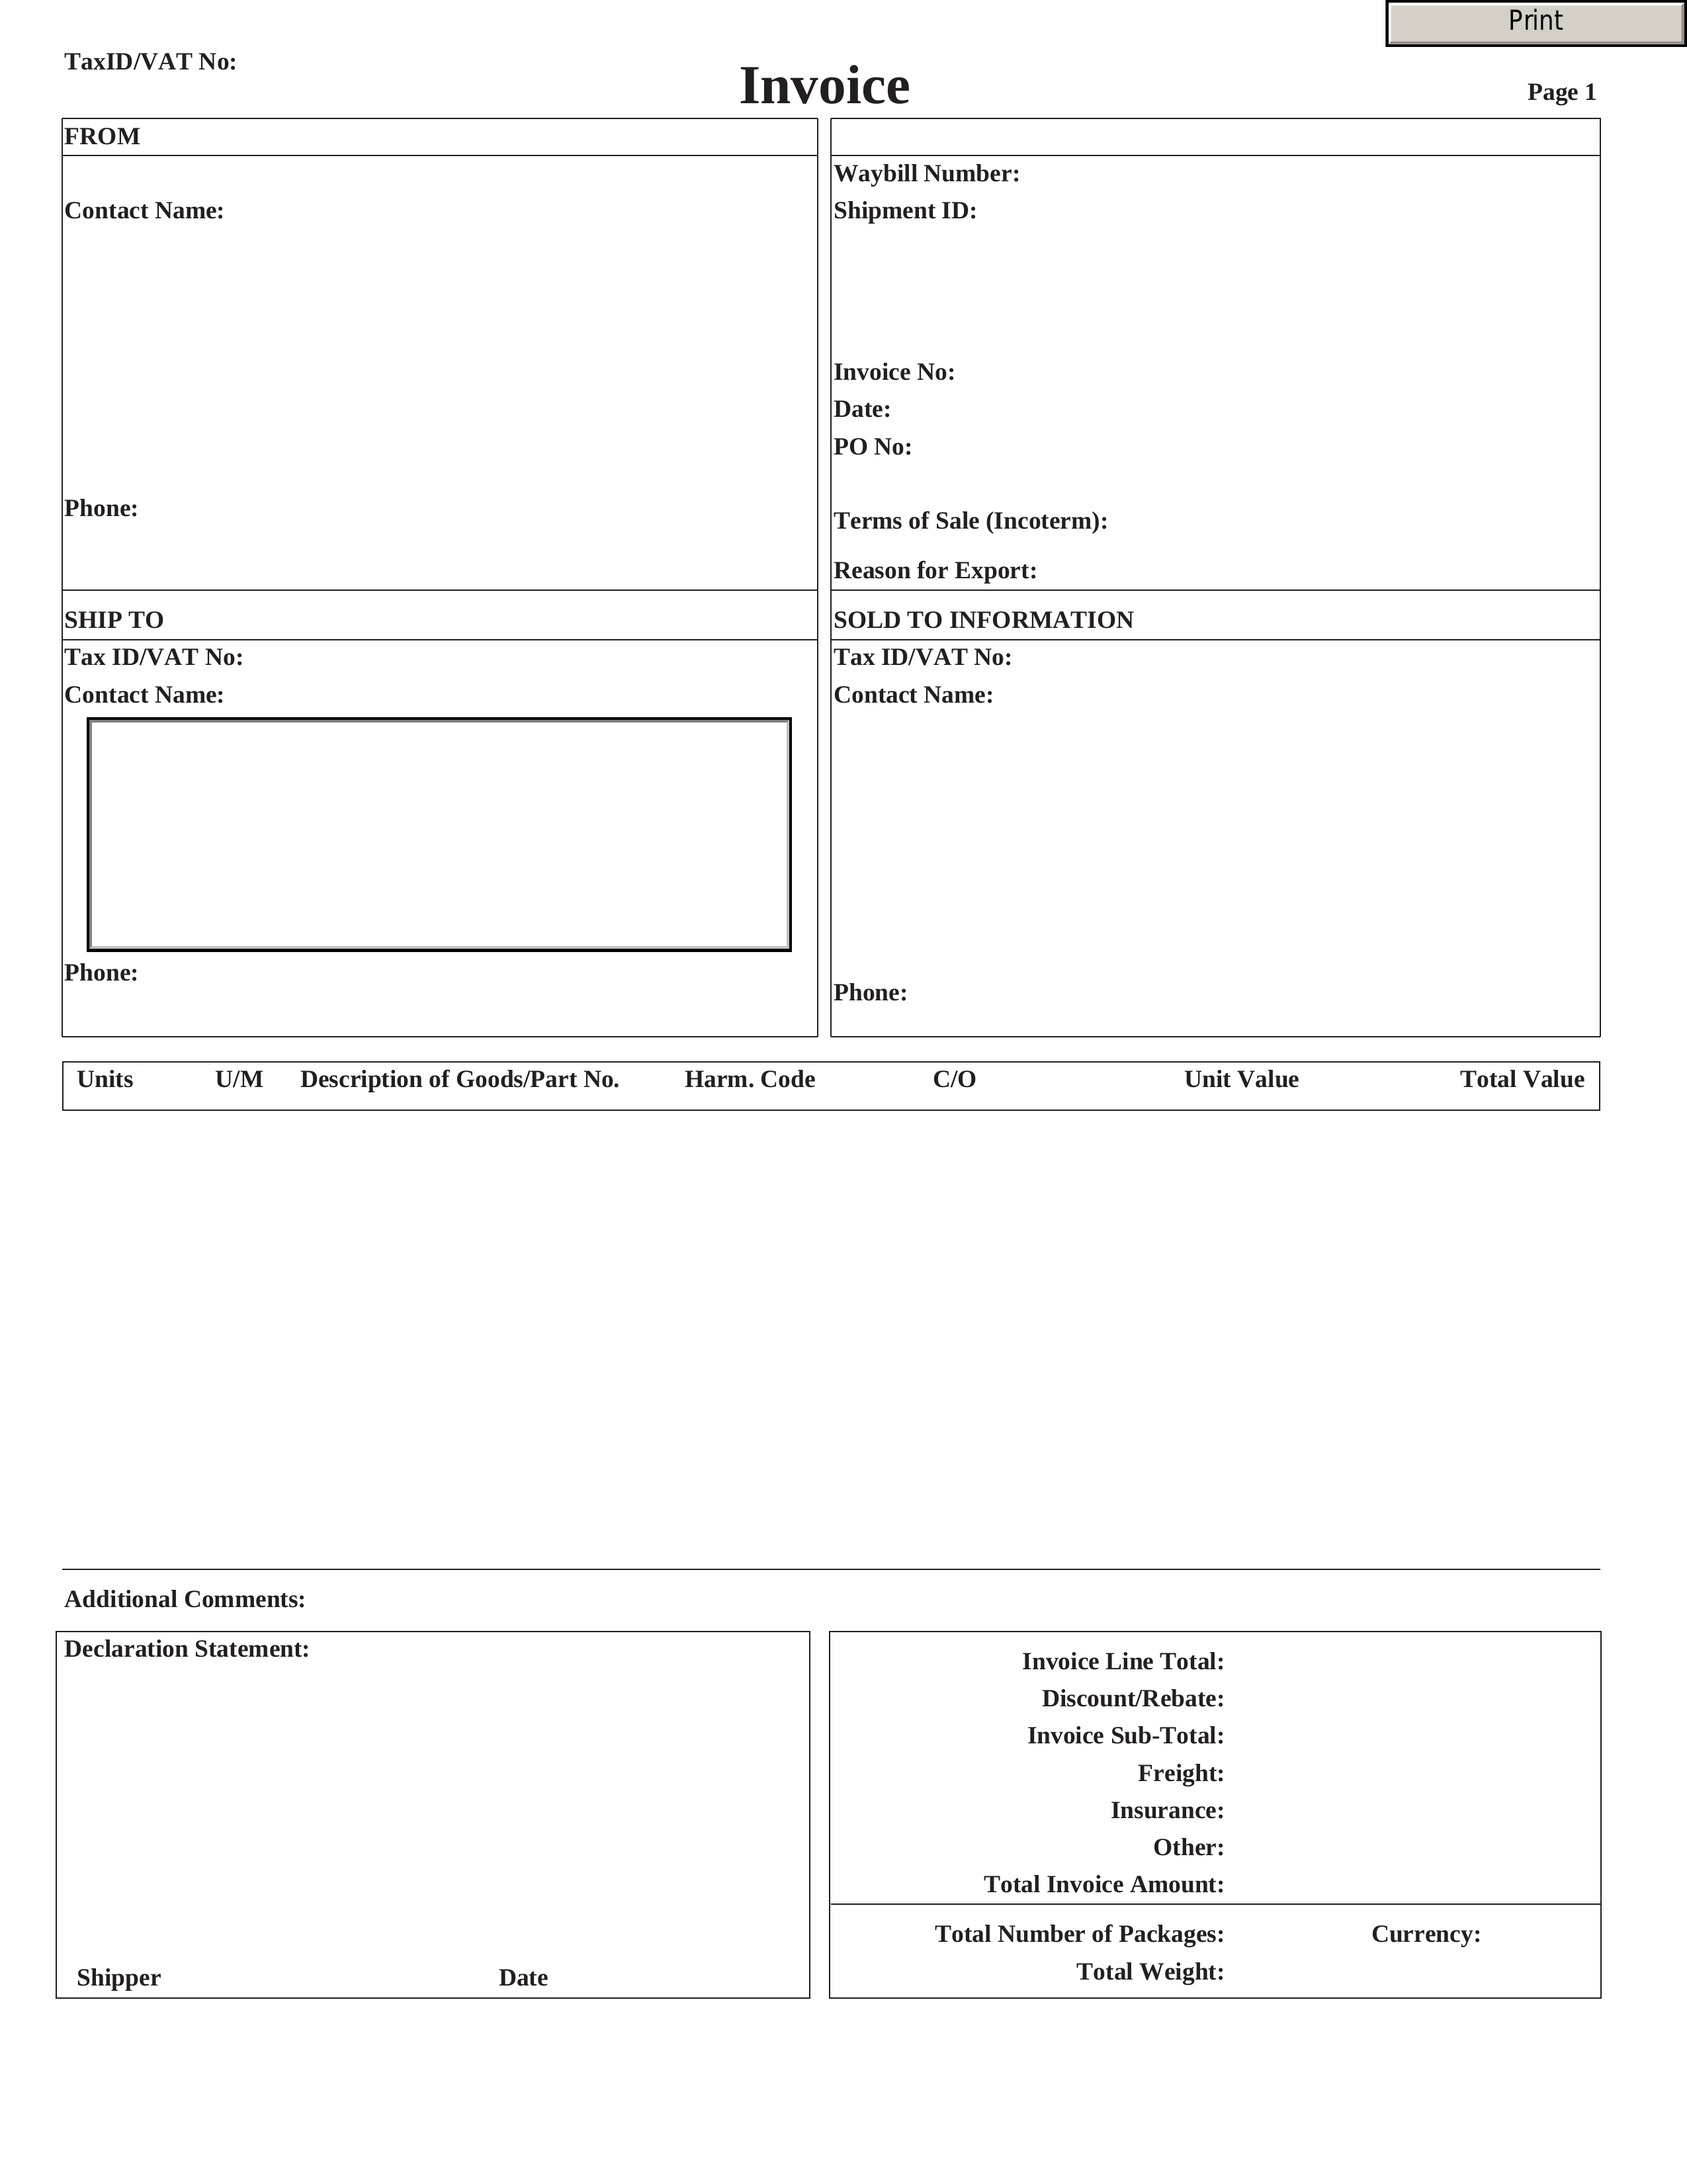 free ups commercial invoice template pdf eforms free ups customs forms pdf